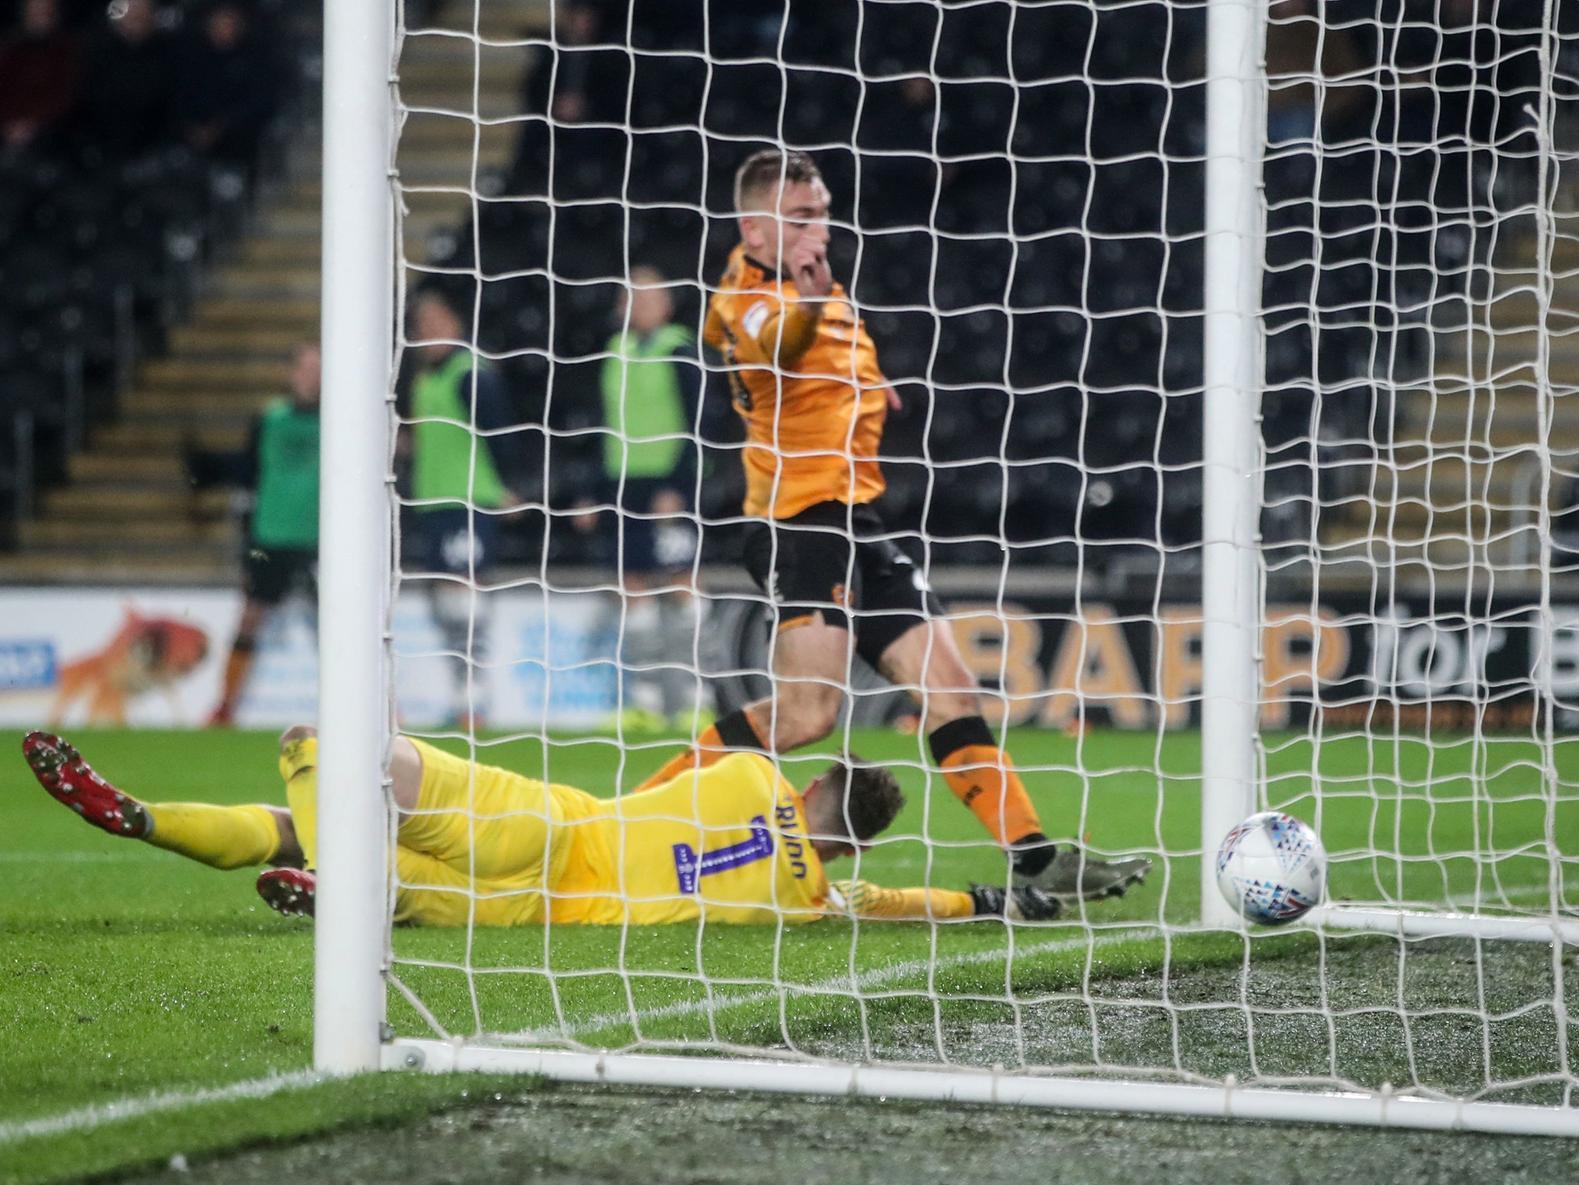 Jarrod Bowen is on fire at the moment which of course means his future is hot discussion. However, owner Assem Allam is reluctant to sell the forward, despite his contract expiring in the summer.